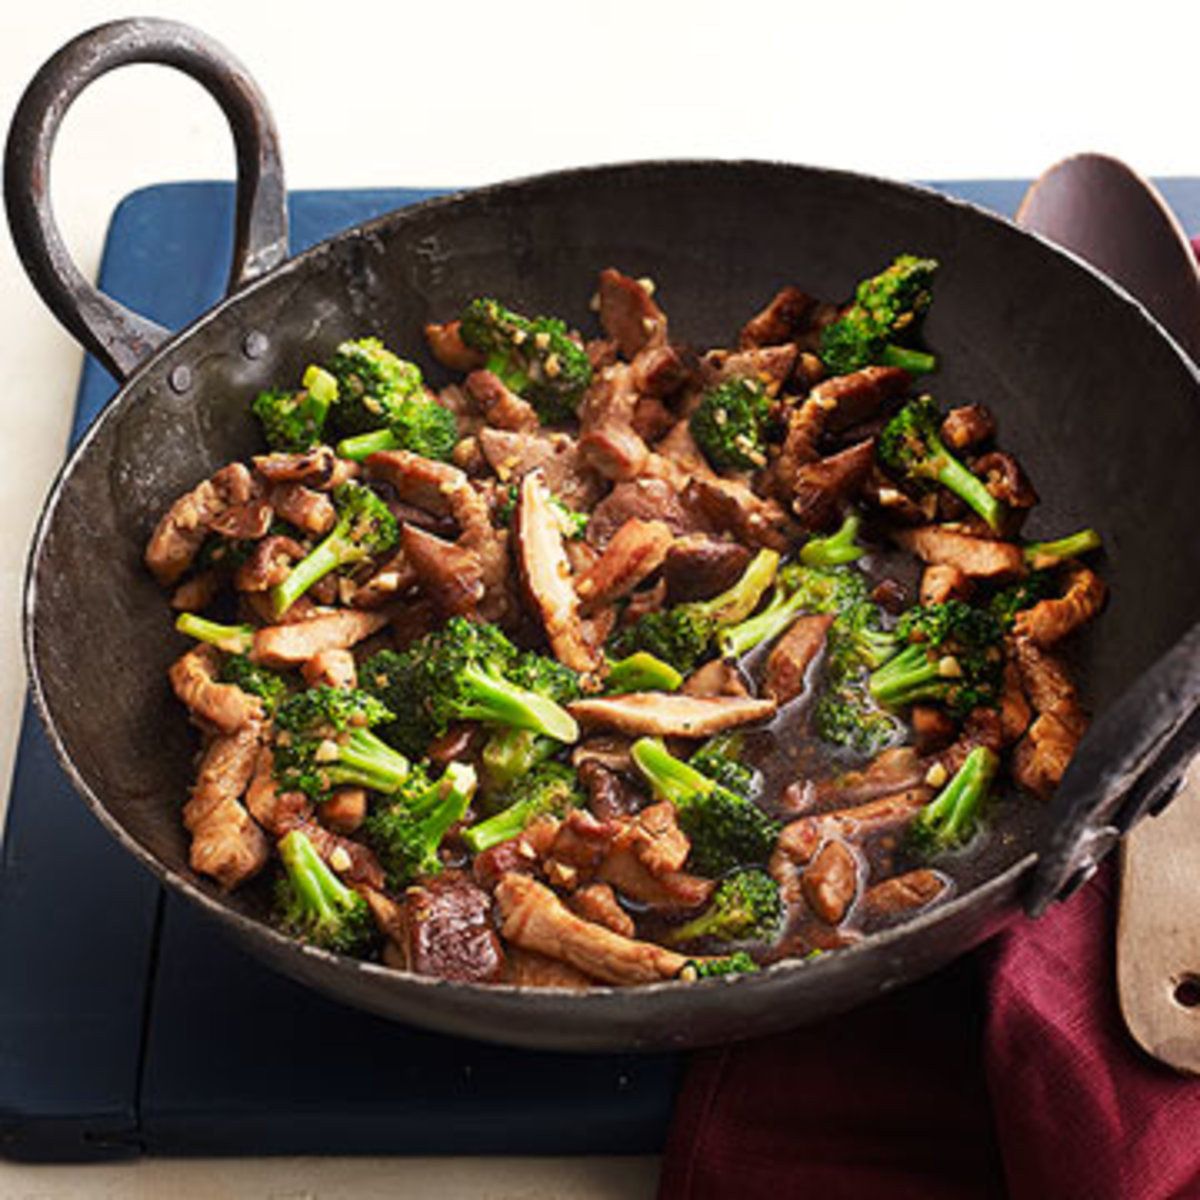 Pork Broccoli Stir Fry
 Pork & Broccoli Stir Fry Rachael Ray Every Day